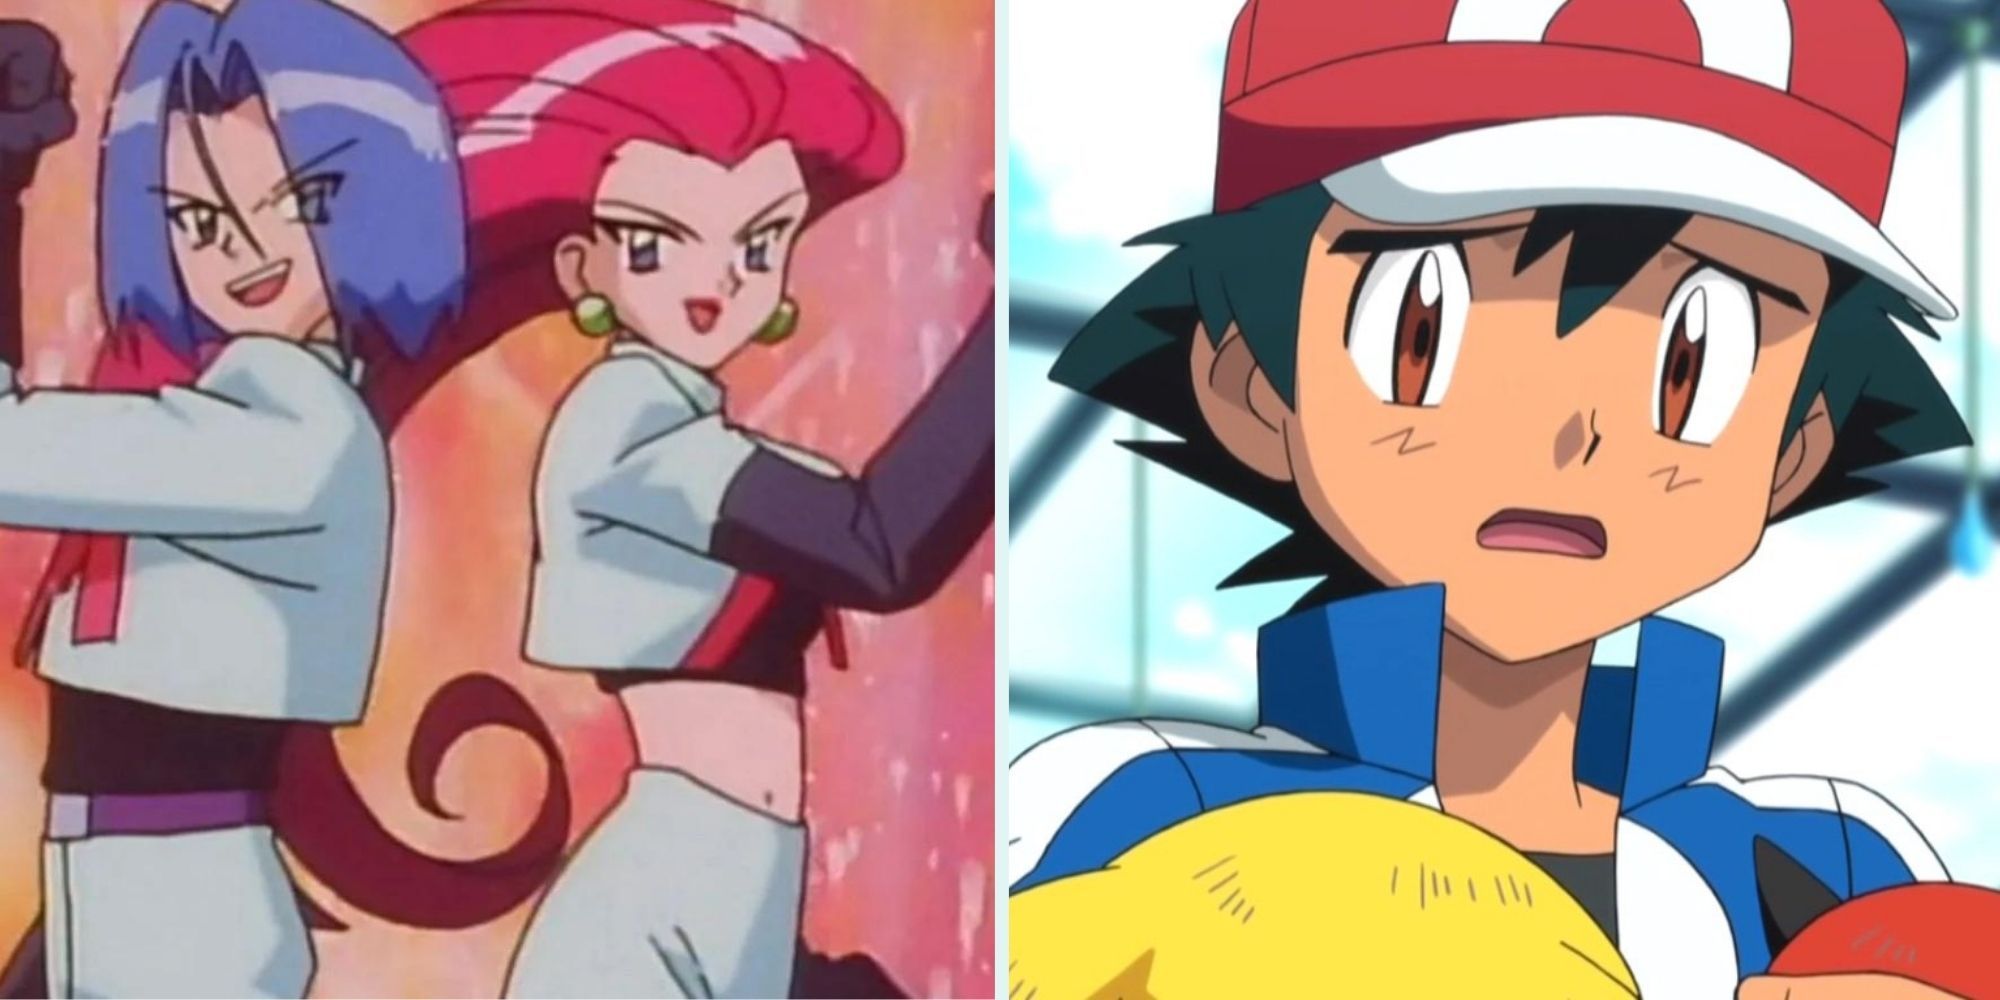 Times Team Rocket Bested Defeated Ash Pokemon Anime